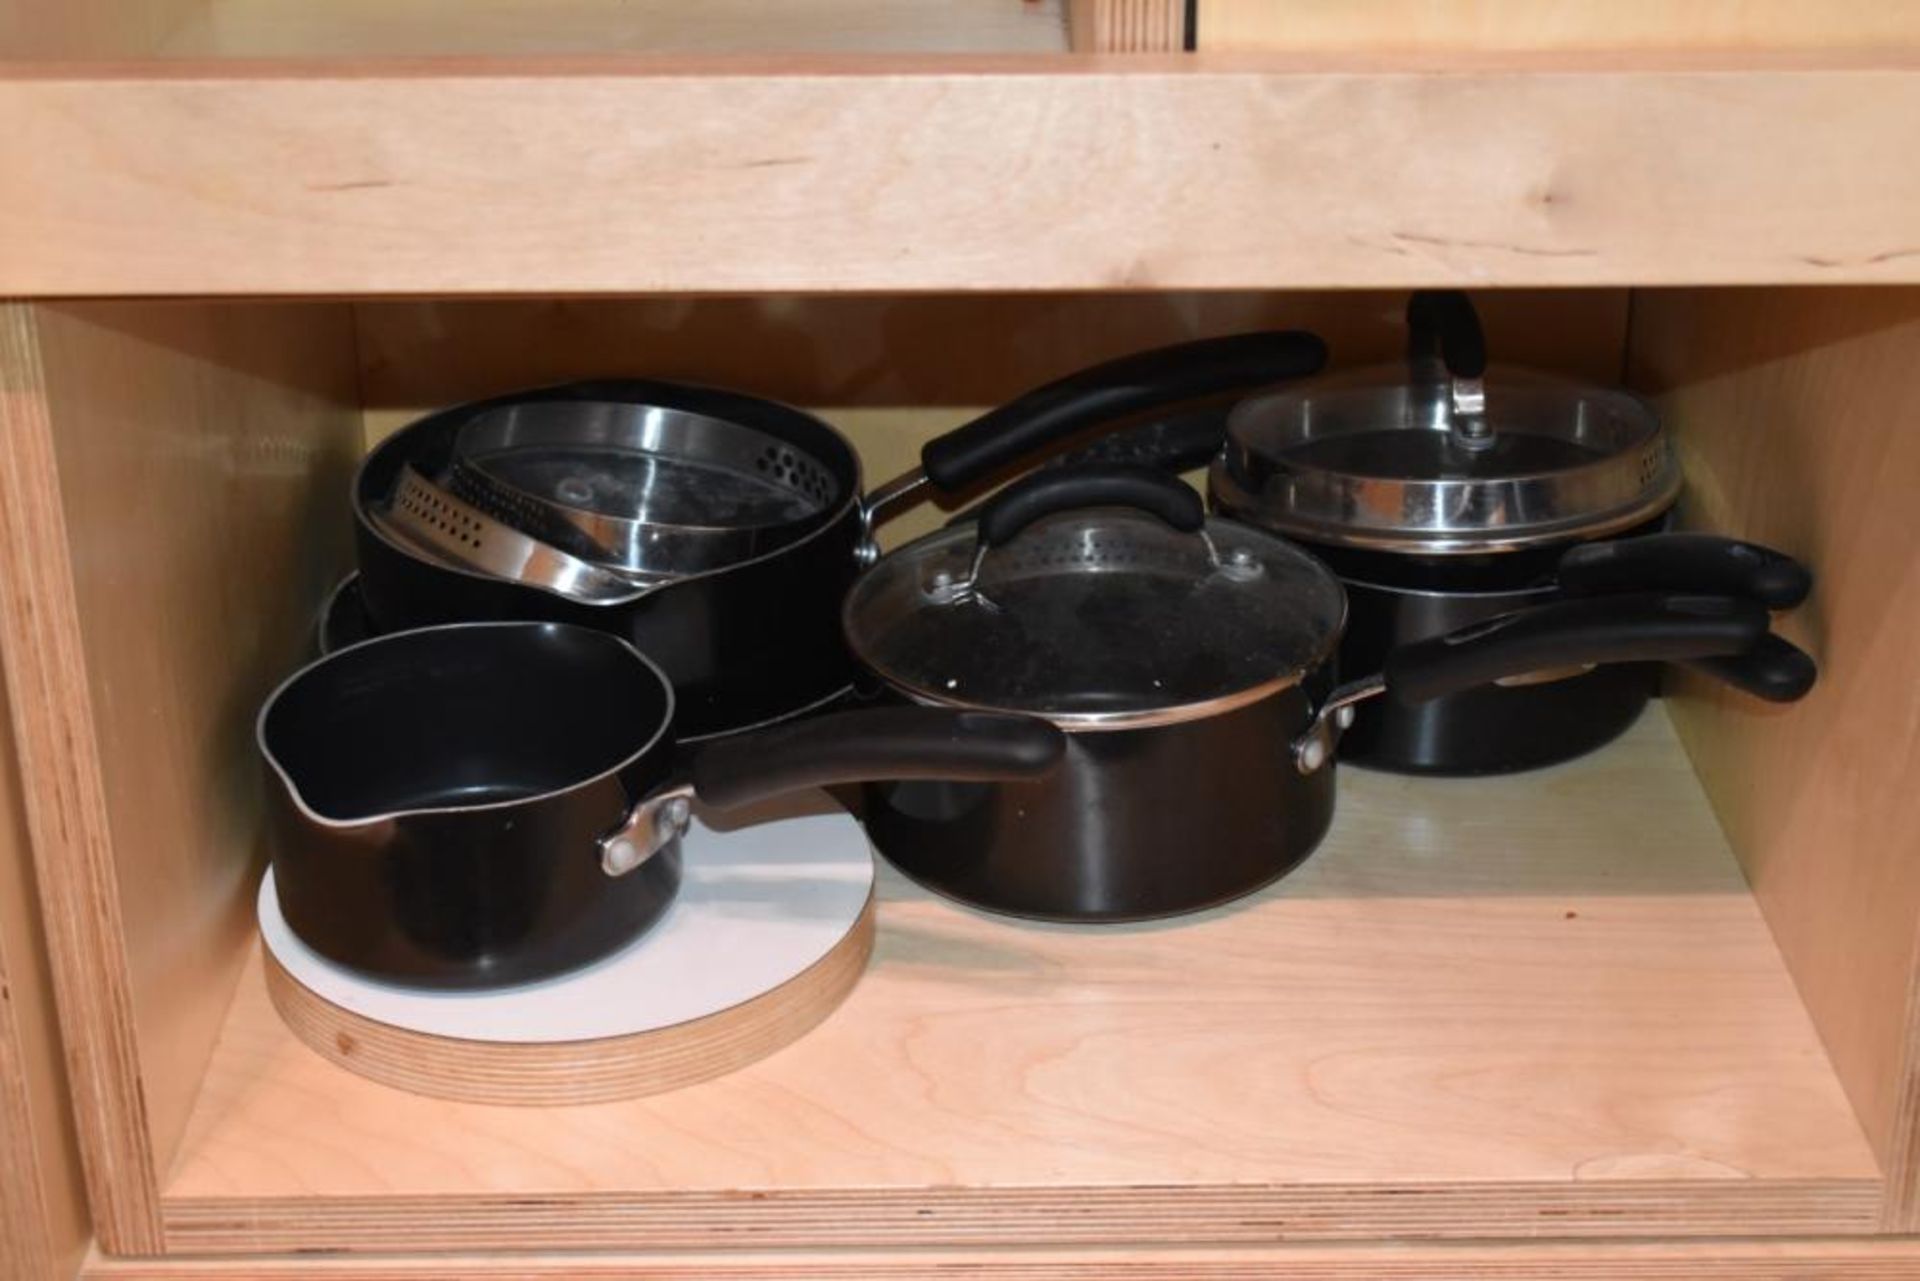 Large Collection of Kitchen Accessories Including Pans, Tubs, Bowls, Knife Set and Utensils etc - - Image 2 of 19